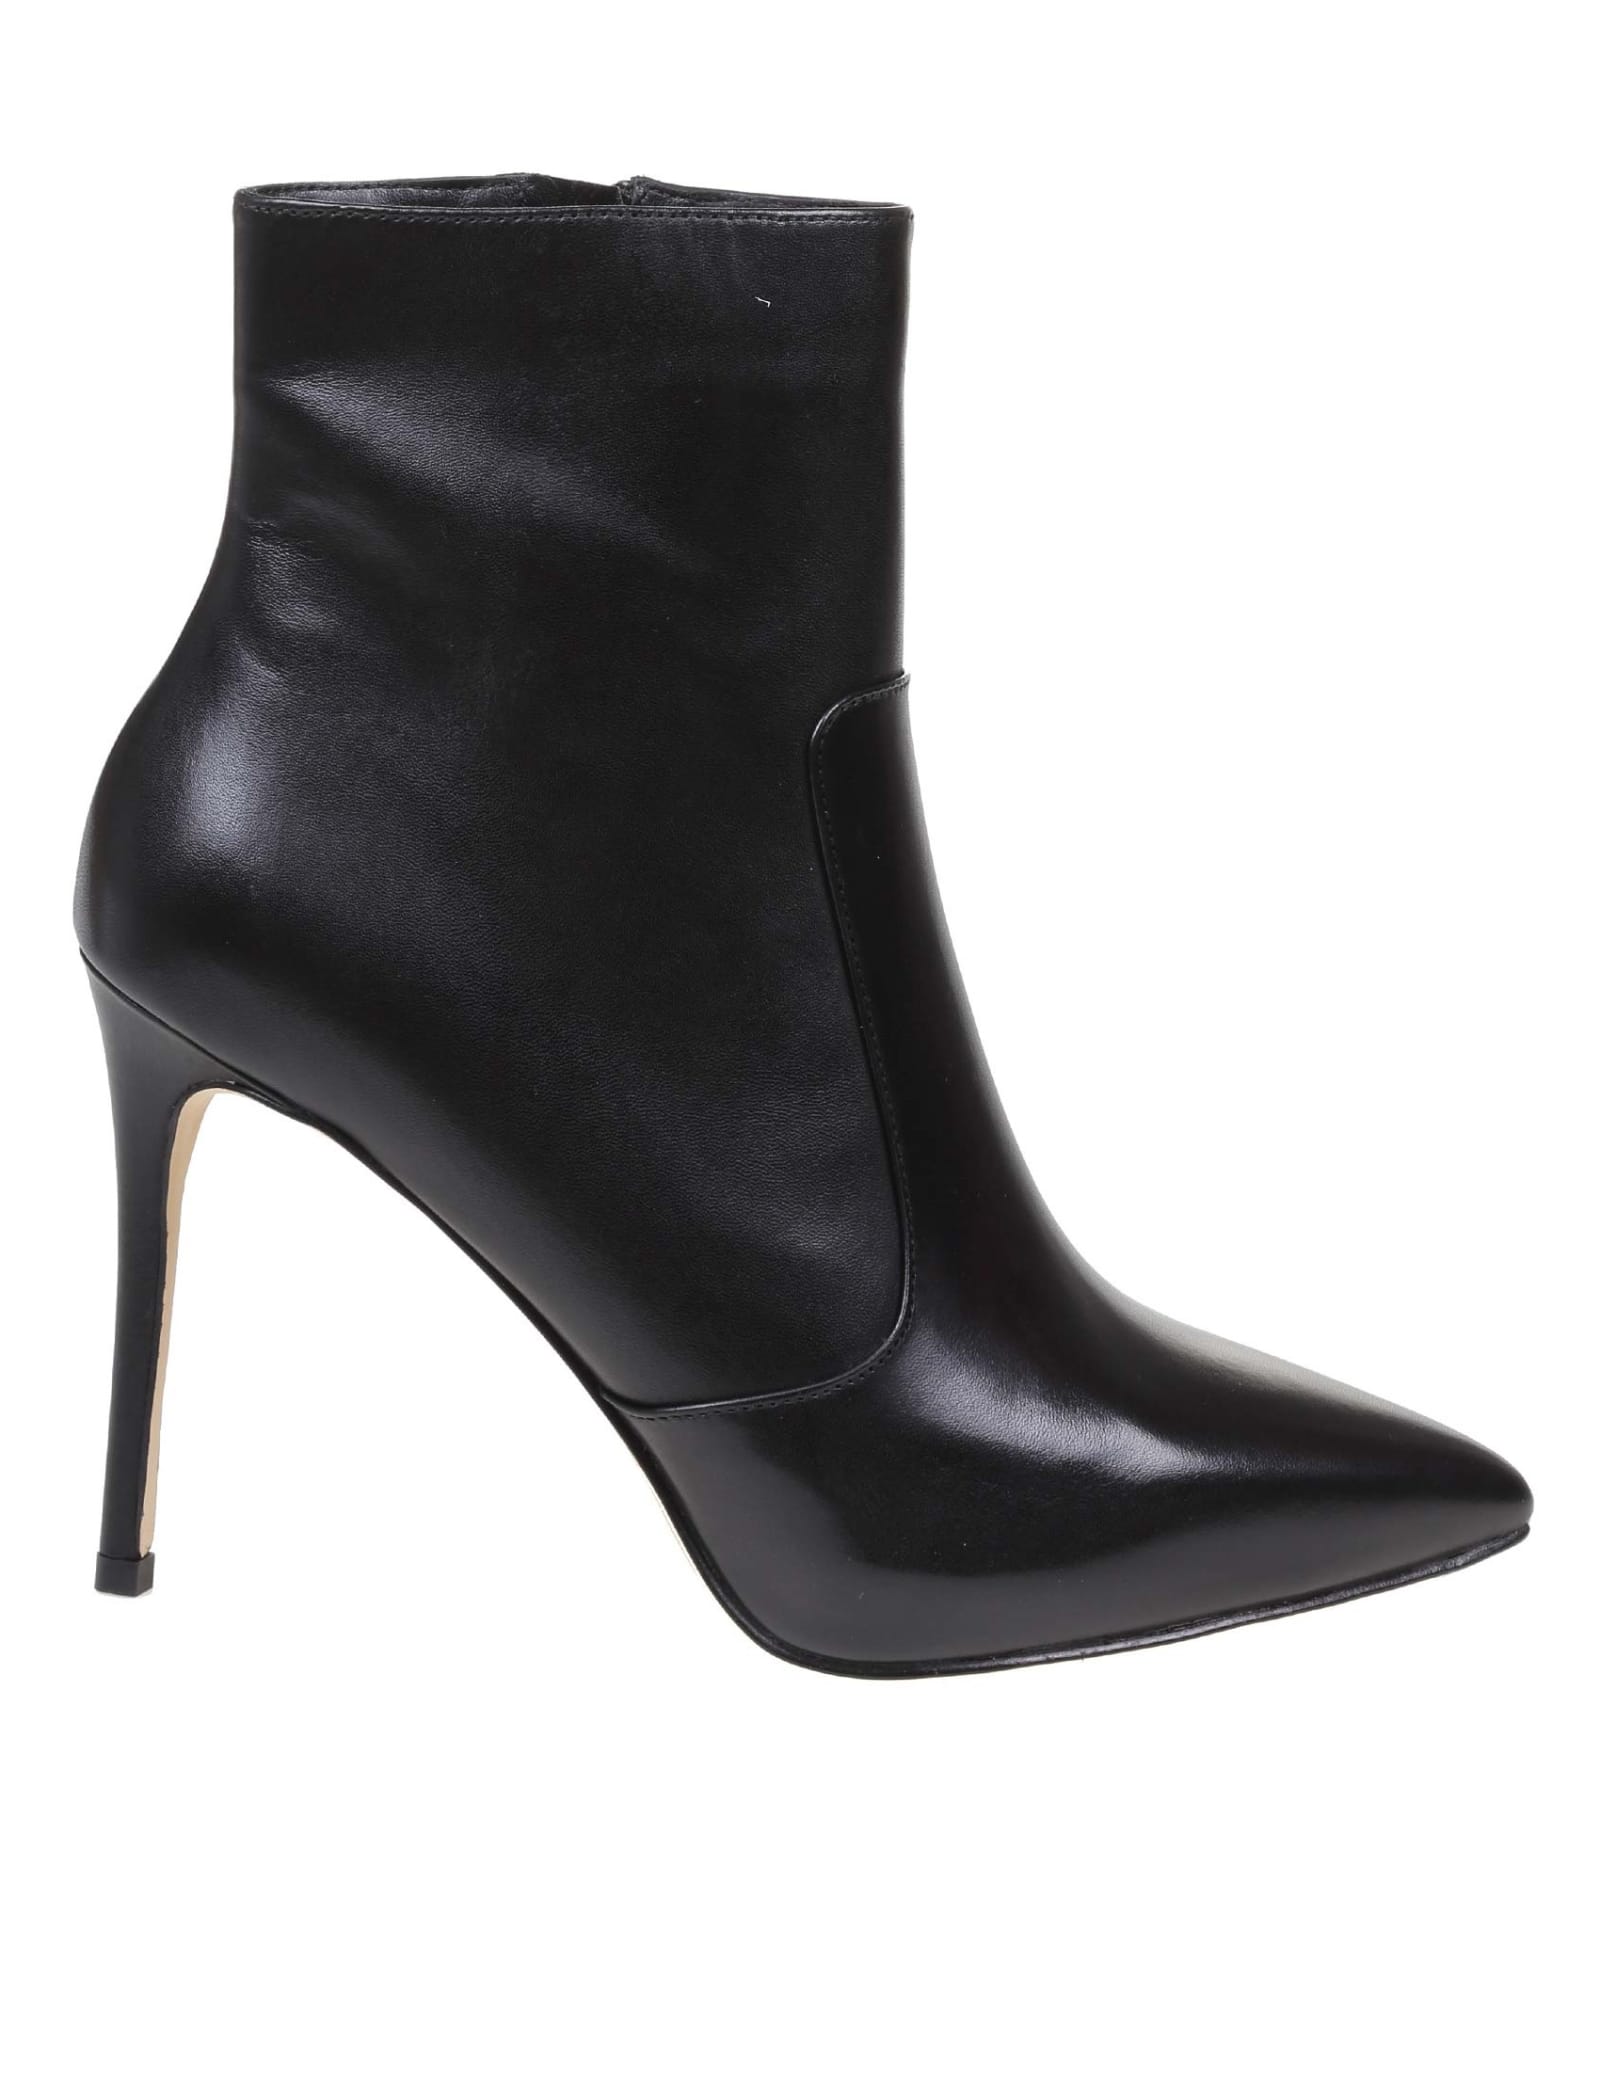 Michael Kors Women's  Black Leather Ankle Boots